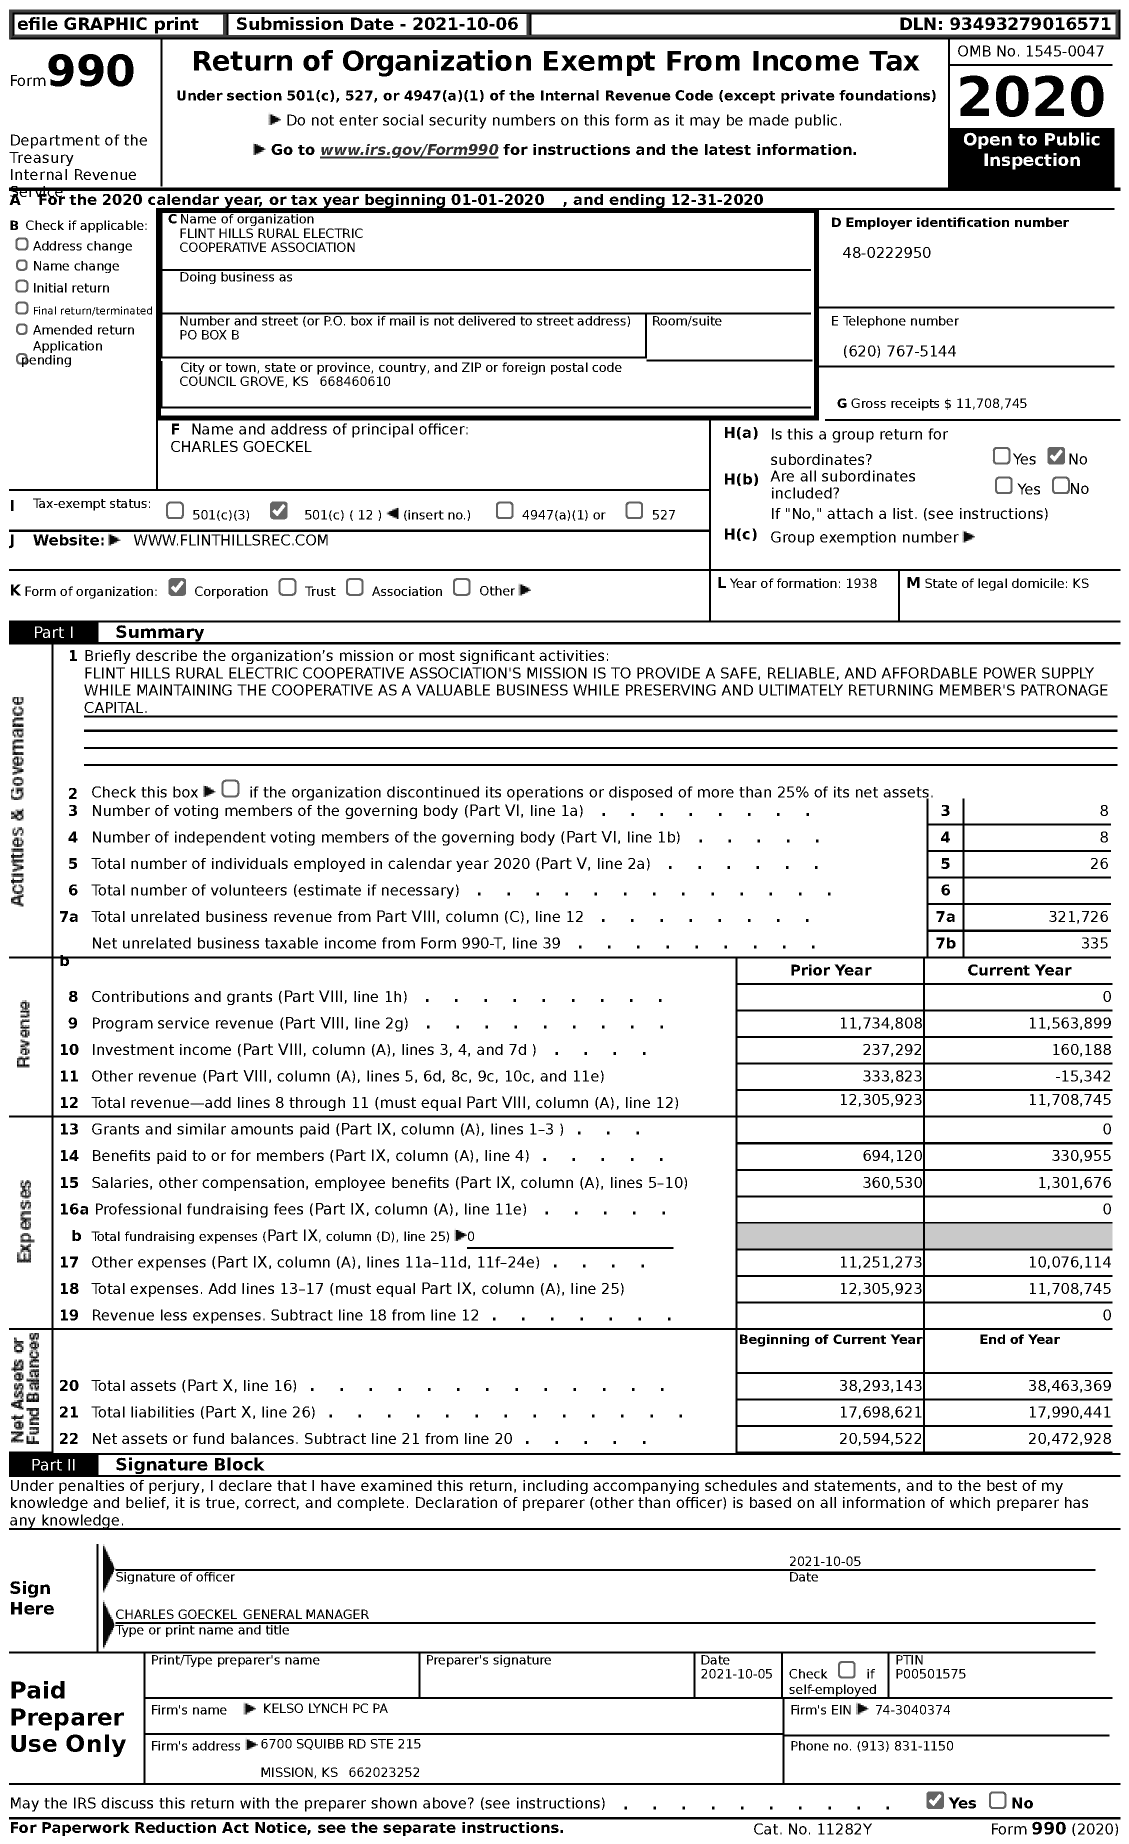 Image of first page of 2020 Form 990 for Flint Hills Rural Electric Cooperative Association